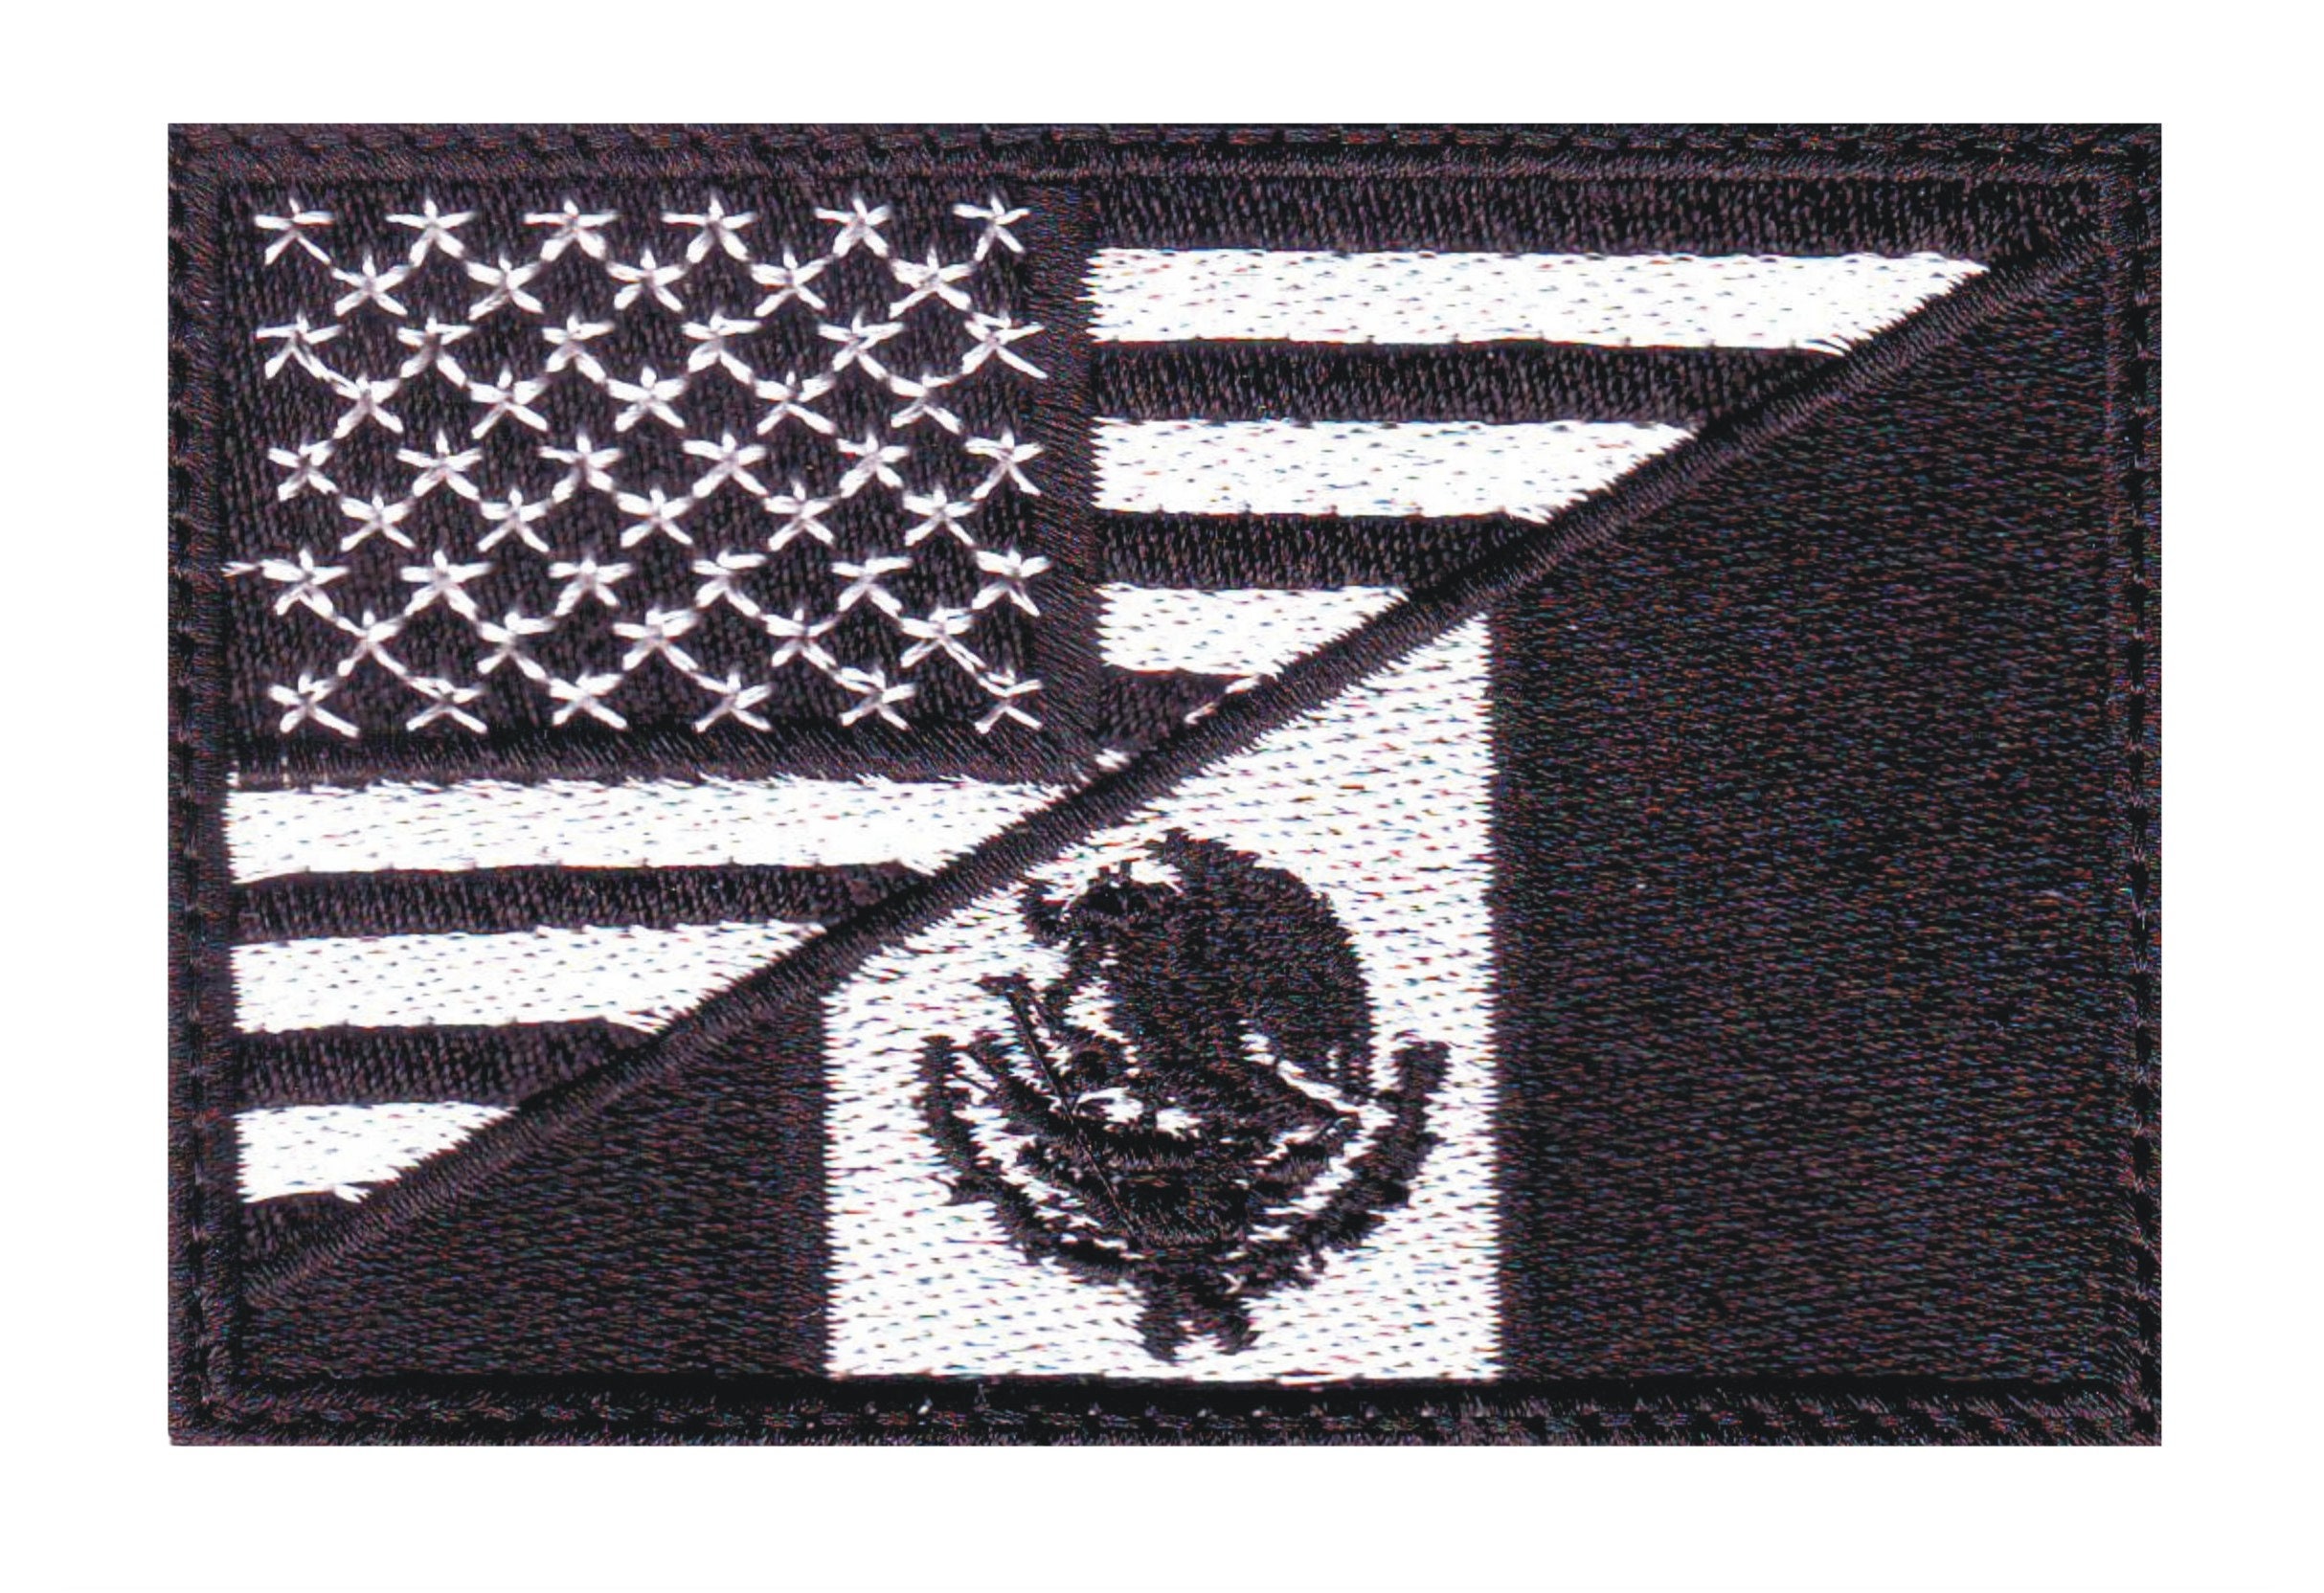 Mexico Flag Patch Full Color – Razor Edge Group